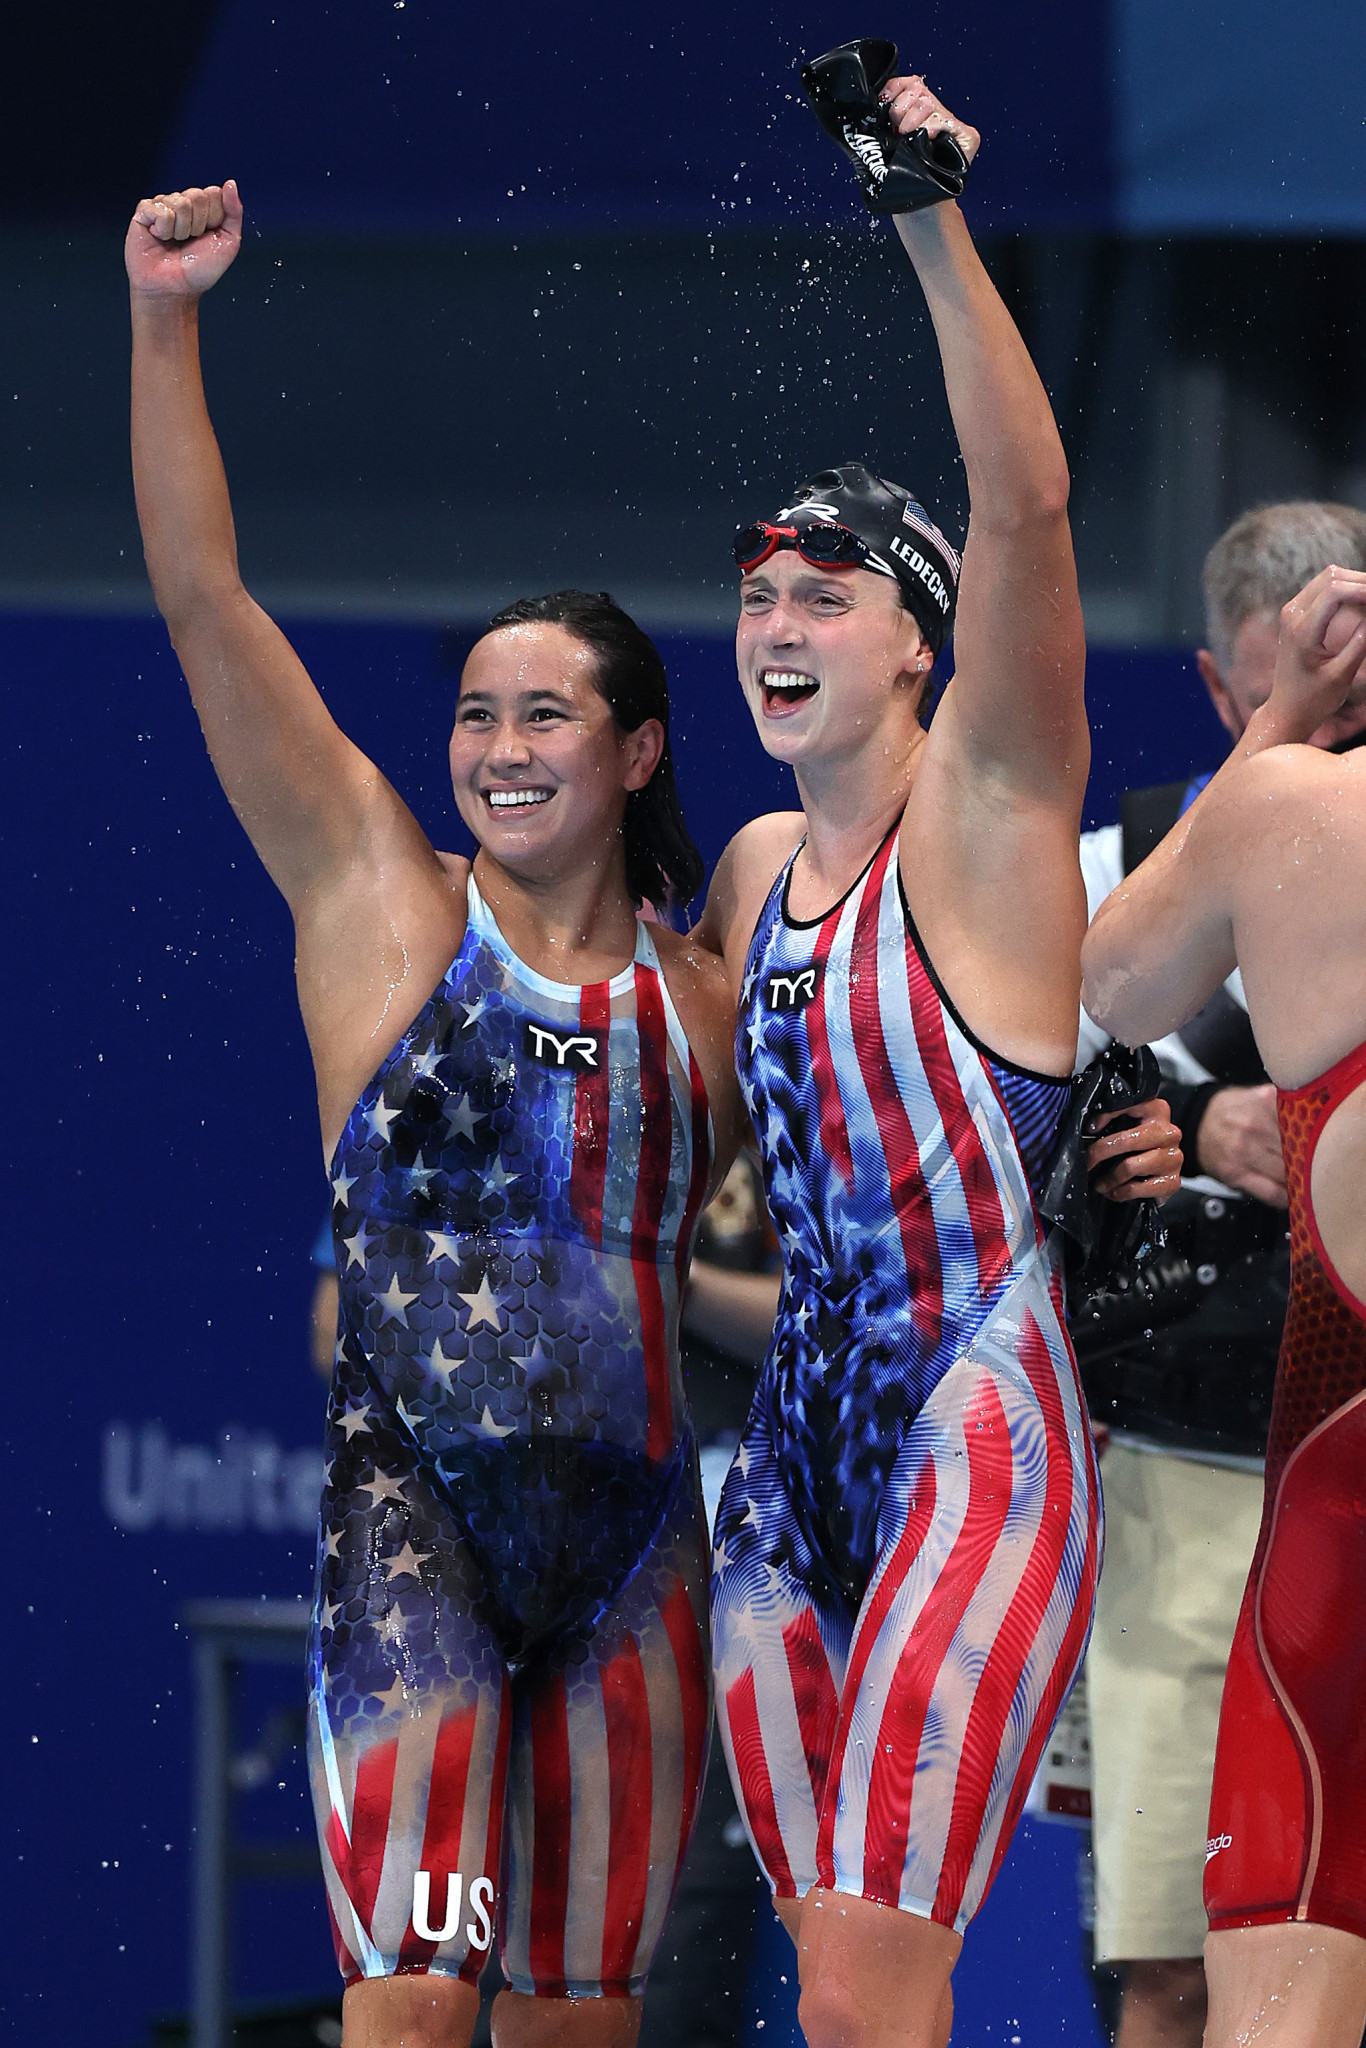 Erica Sullivan, left, won 1500m freestyle silver behind Katie Ledecky at the Tokyo 2020 Olympics ©Getty Images